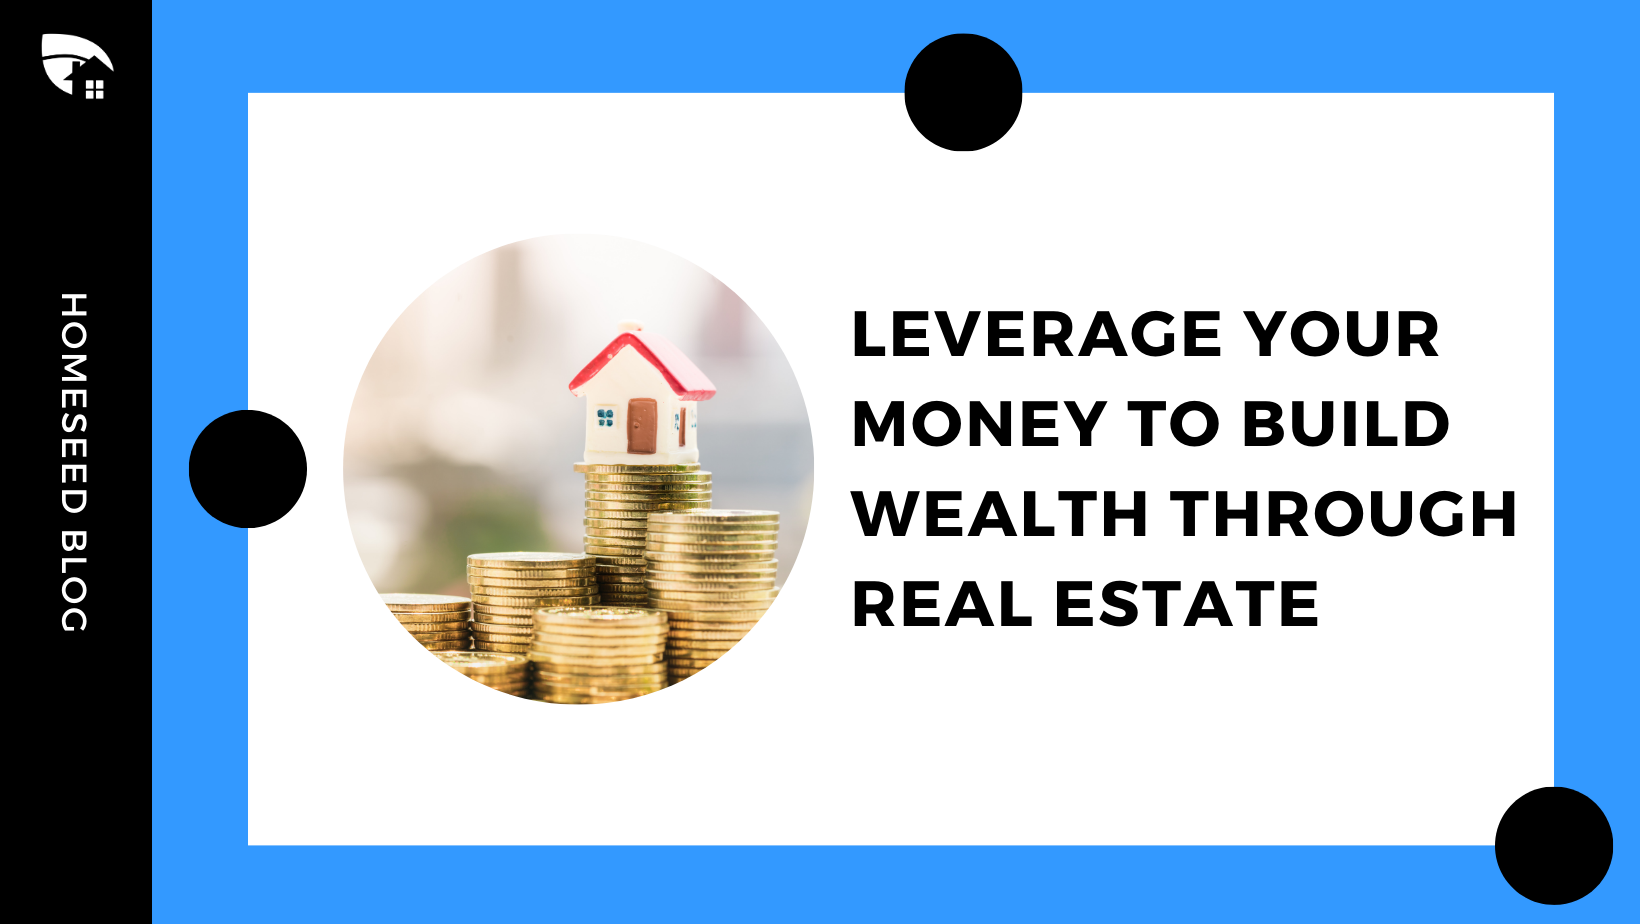 Leverage Your Money and Build Wealth Through Real Estate